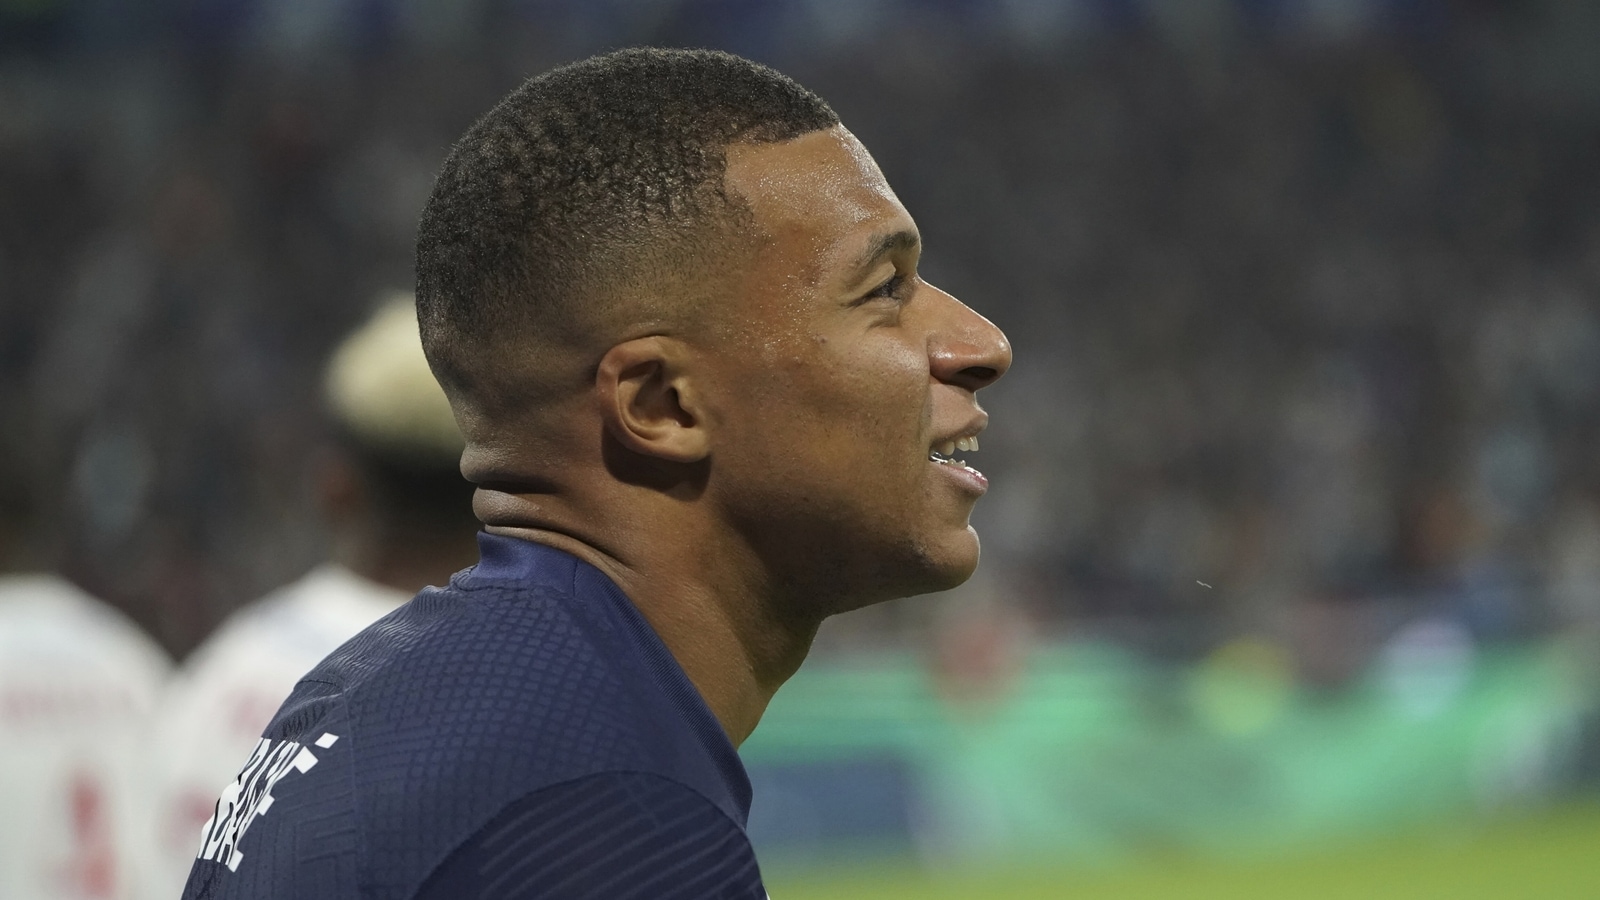 kfc-france-distances-itself-from-executive-comments-on-kylian-mbappe-s-sponsorship-stance